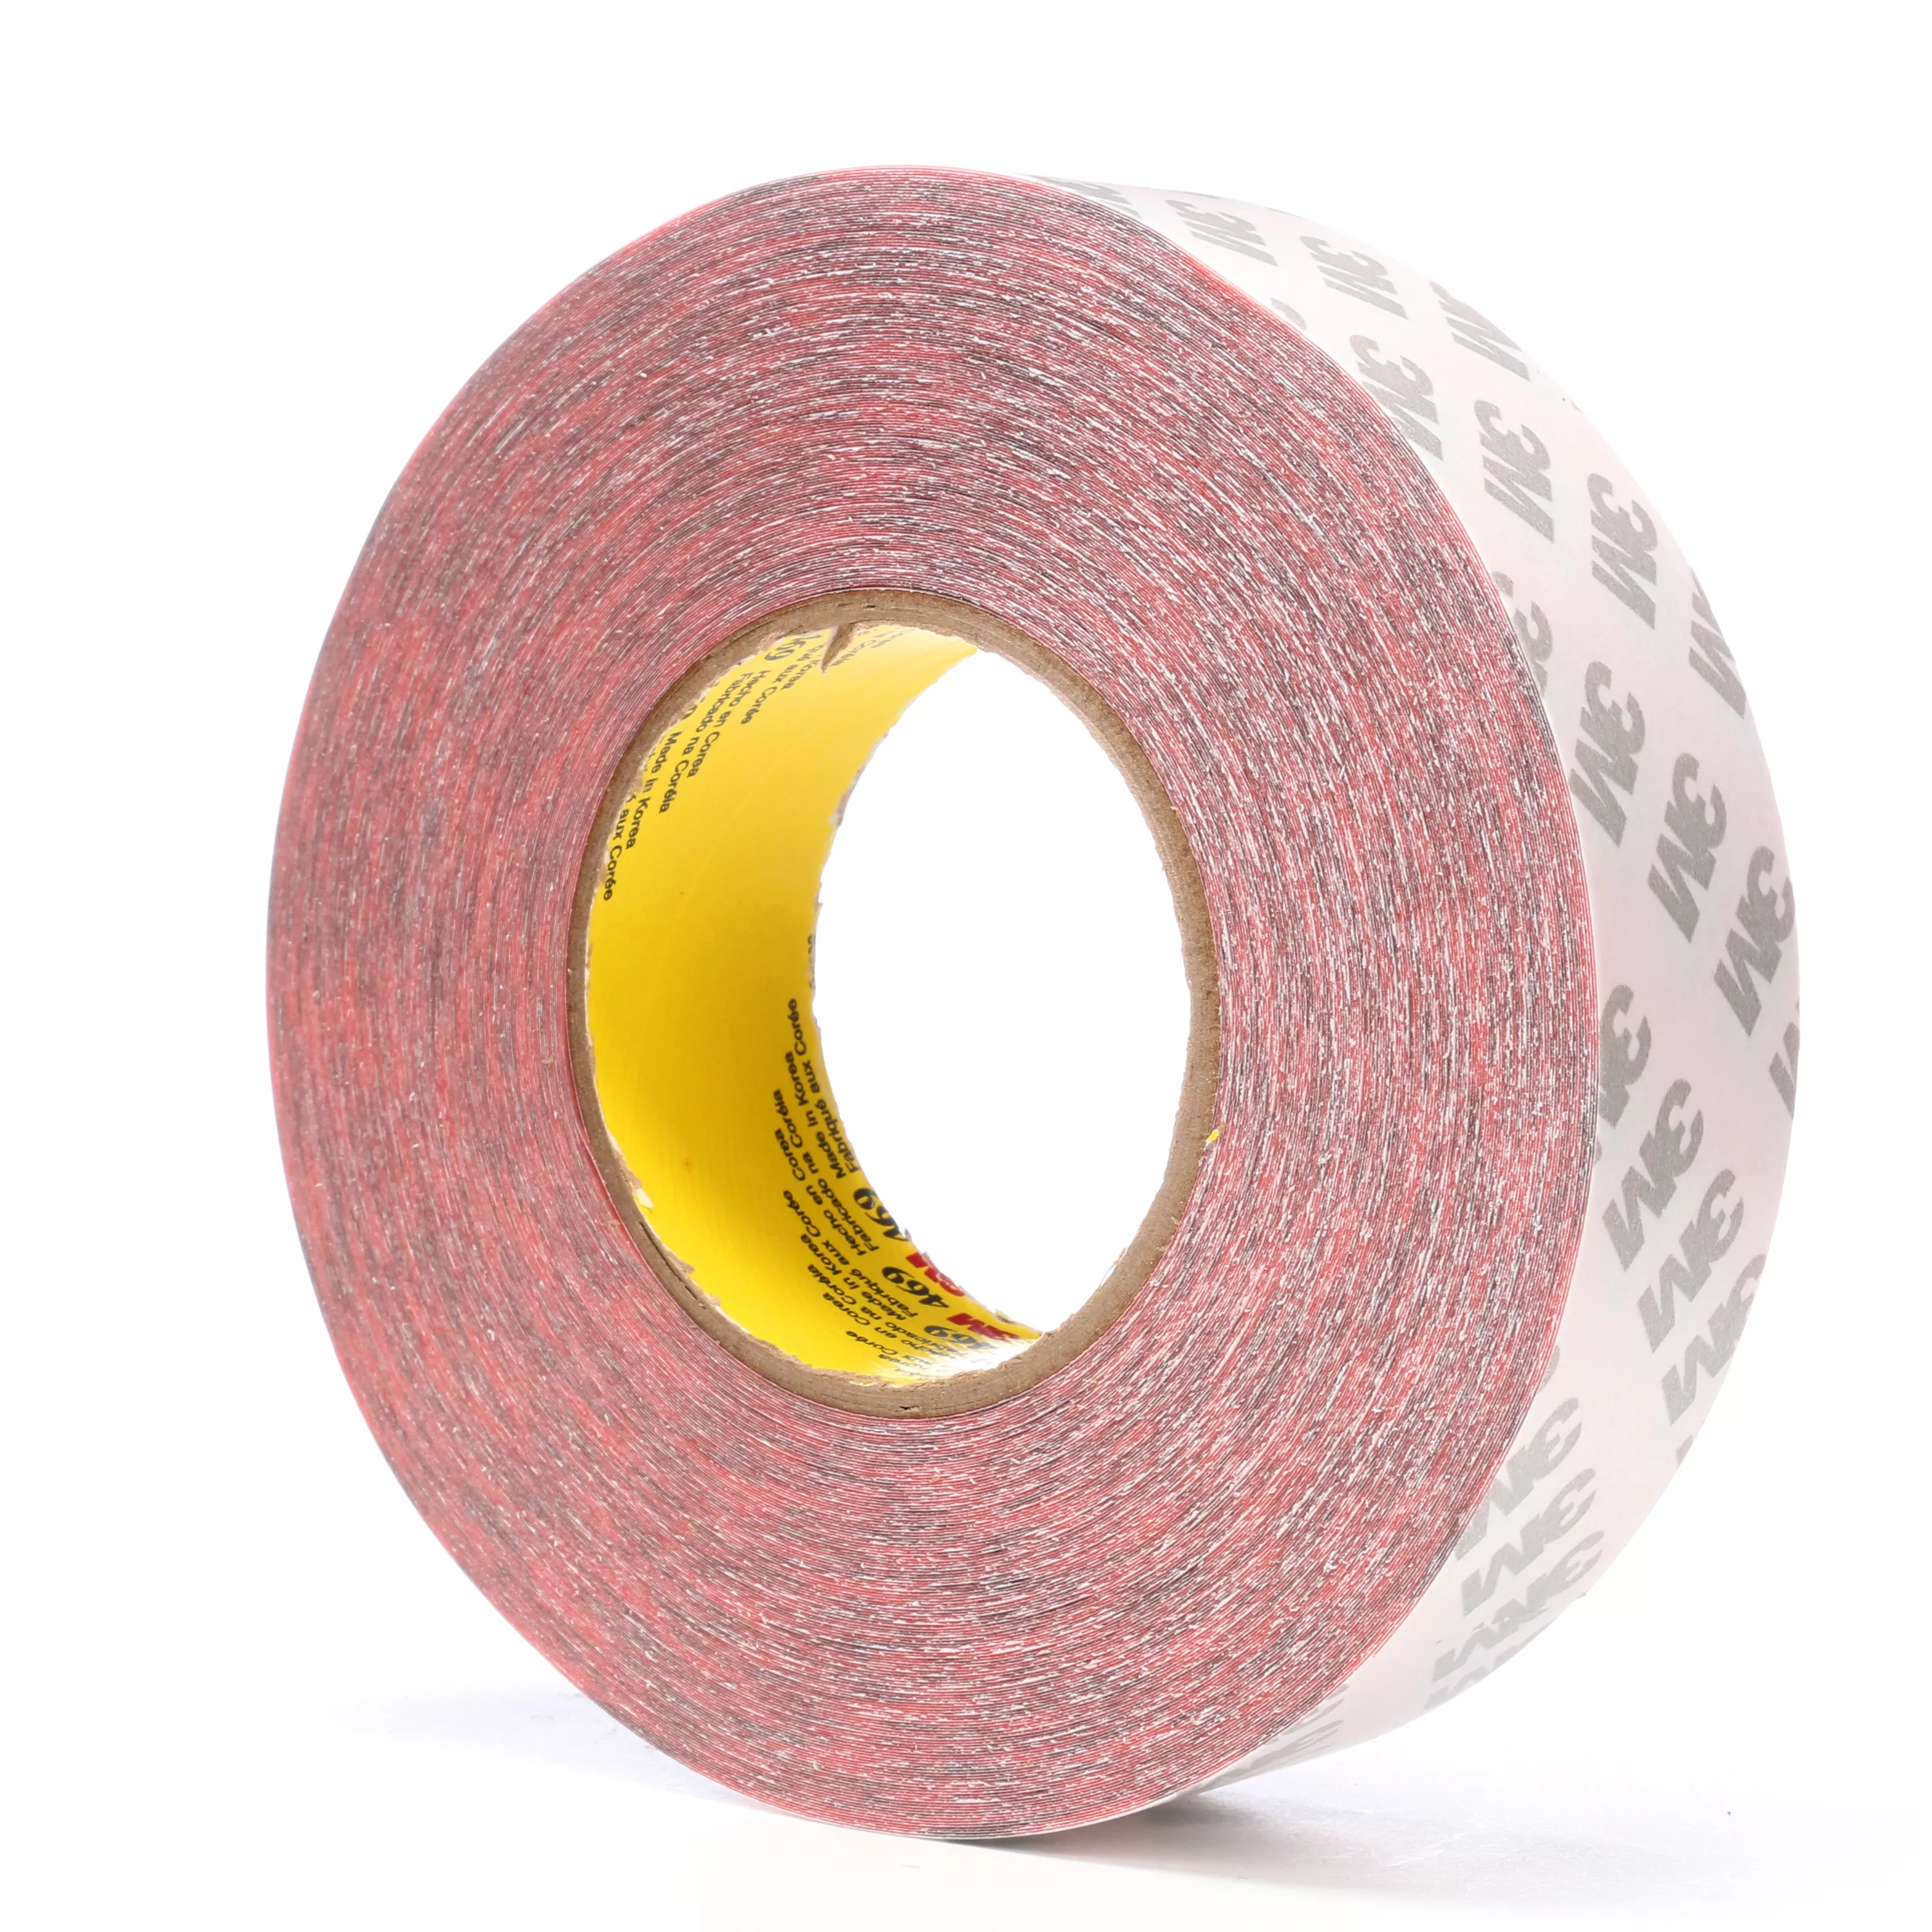 3M™ Double Coated Tape 469, Hi Temp, Red, 1 1/2 in x 60 yd, 5.5 mil, 24
Roll/Case